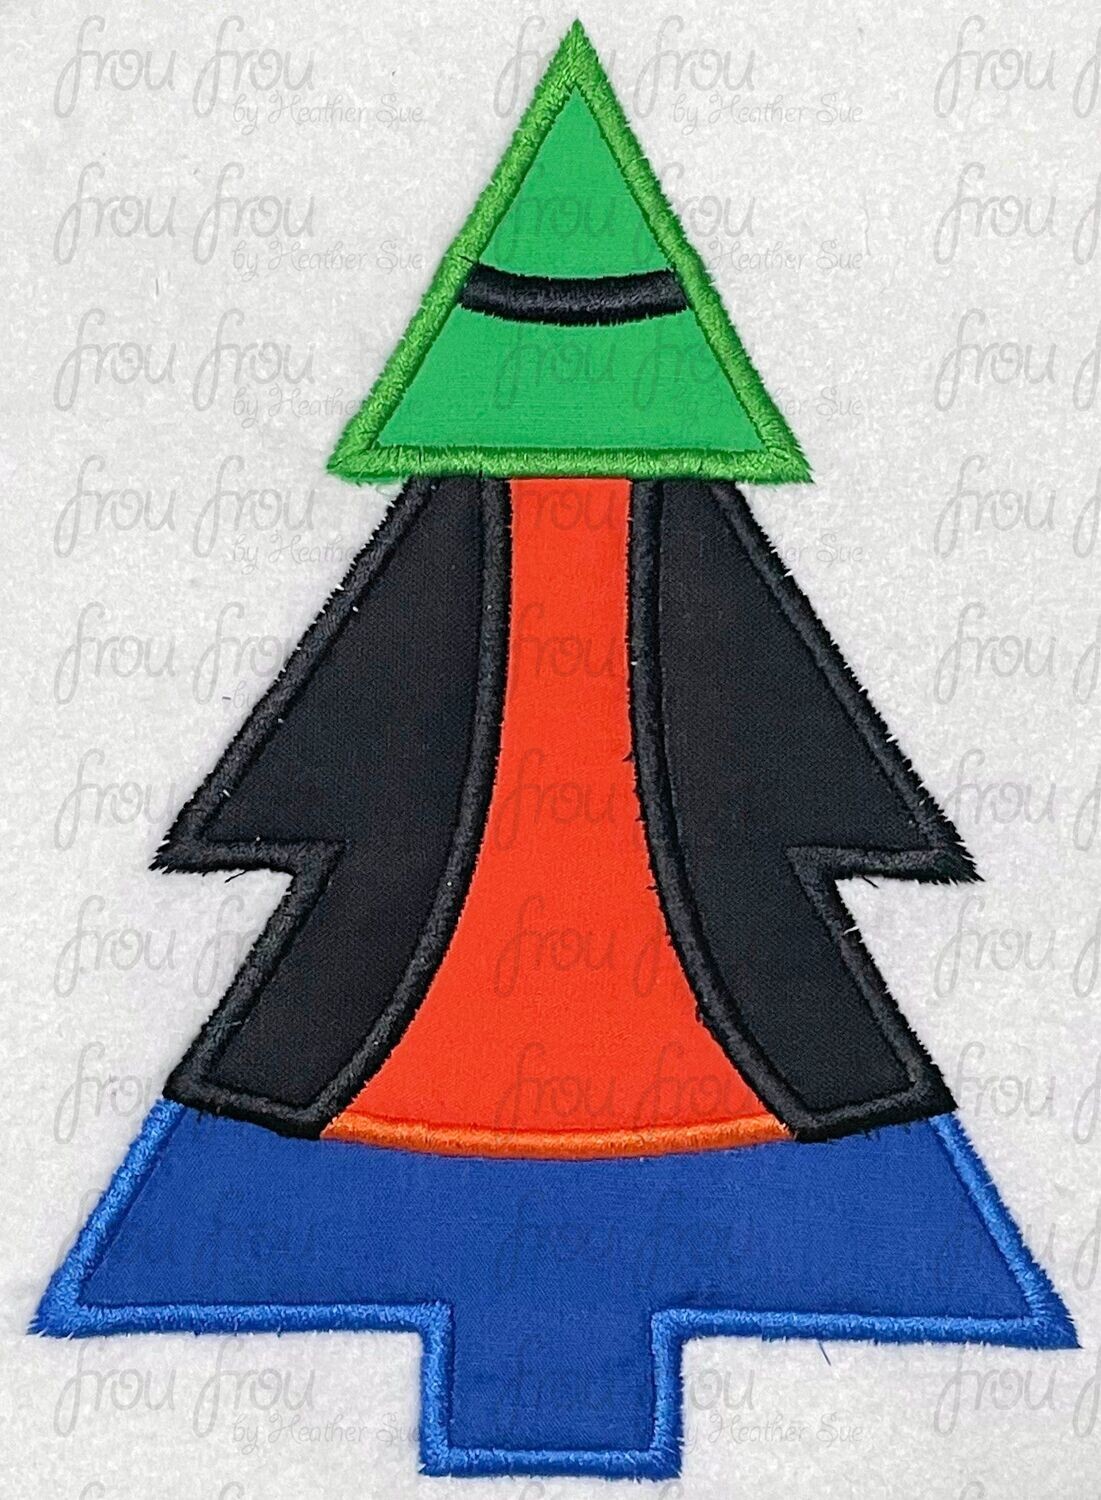 Guufy Christmas Tree Machine Applique Embroidery Design, Multiple Sizes 3"-16"